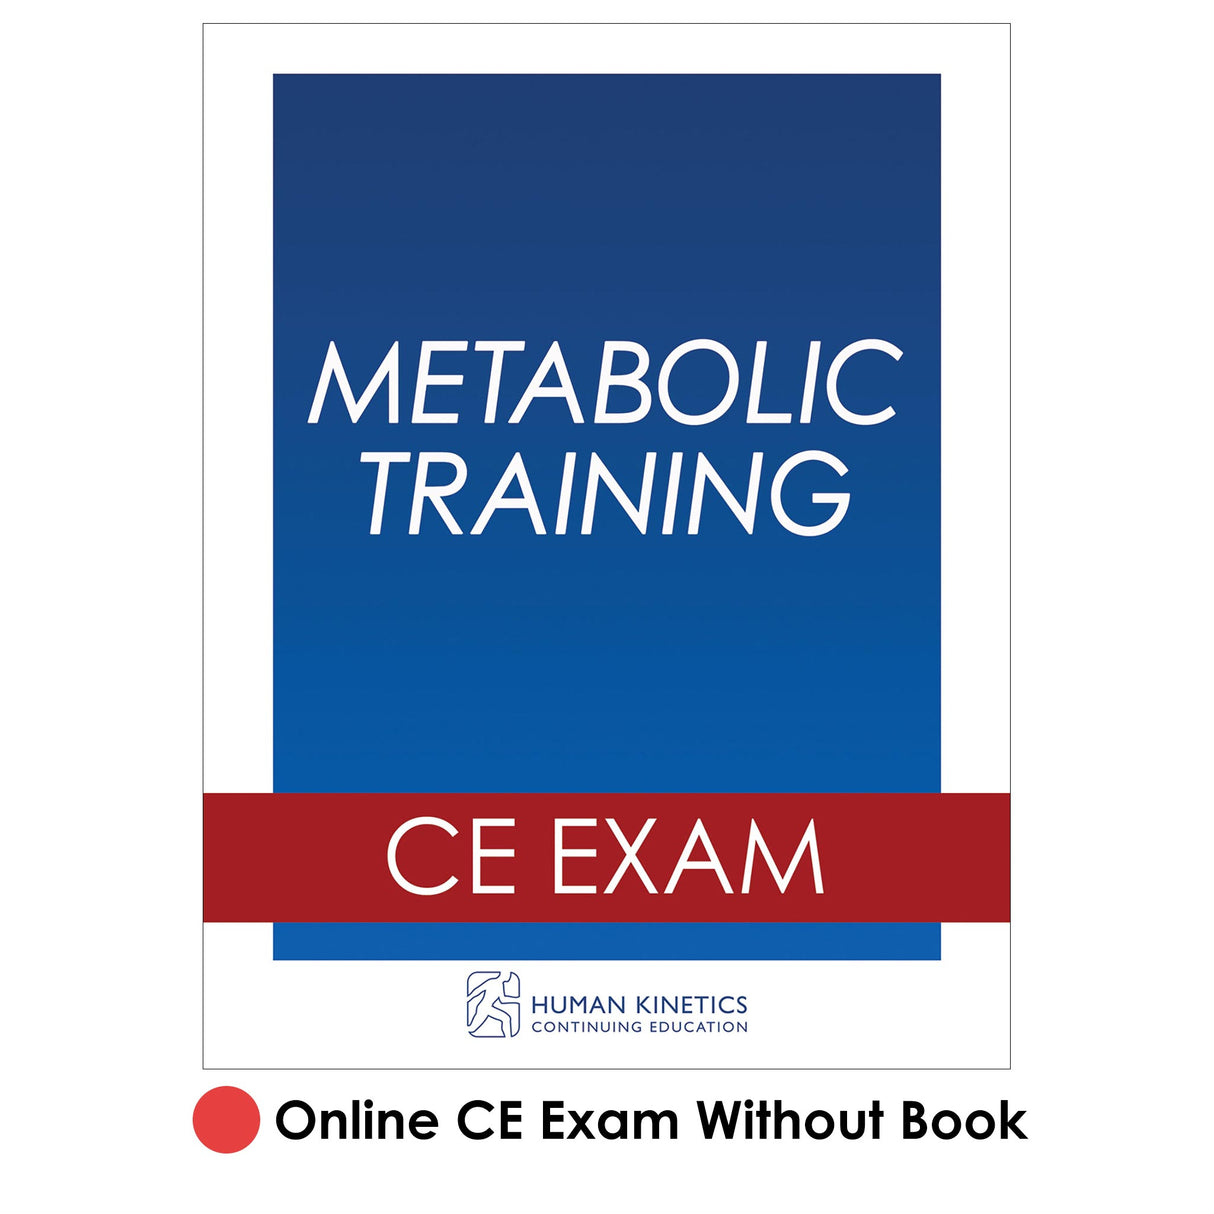 Metabolic Training Online CE Exam Without Book